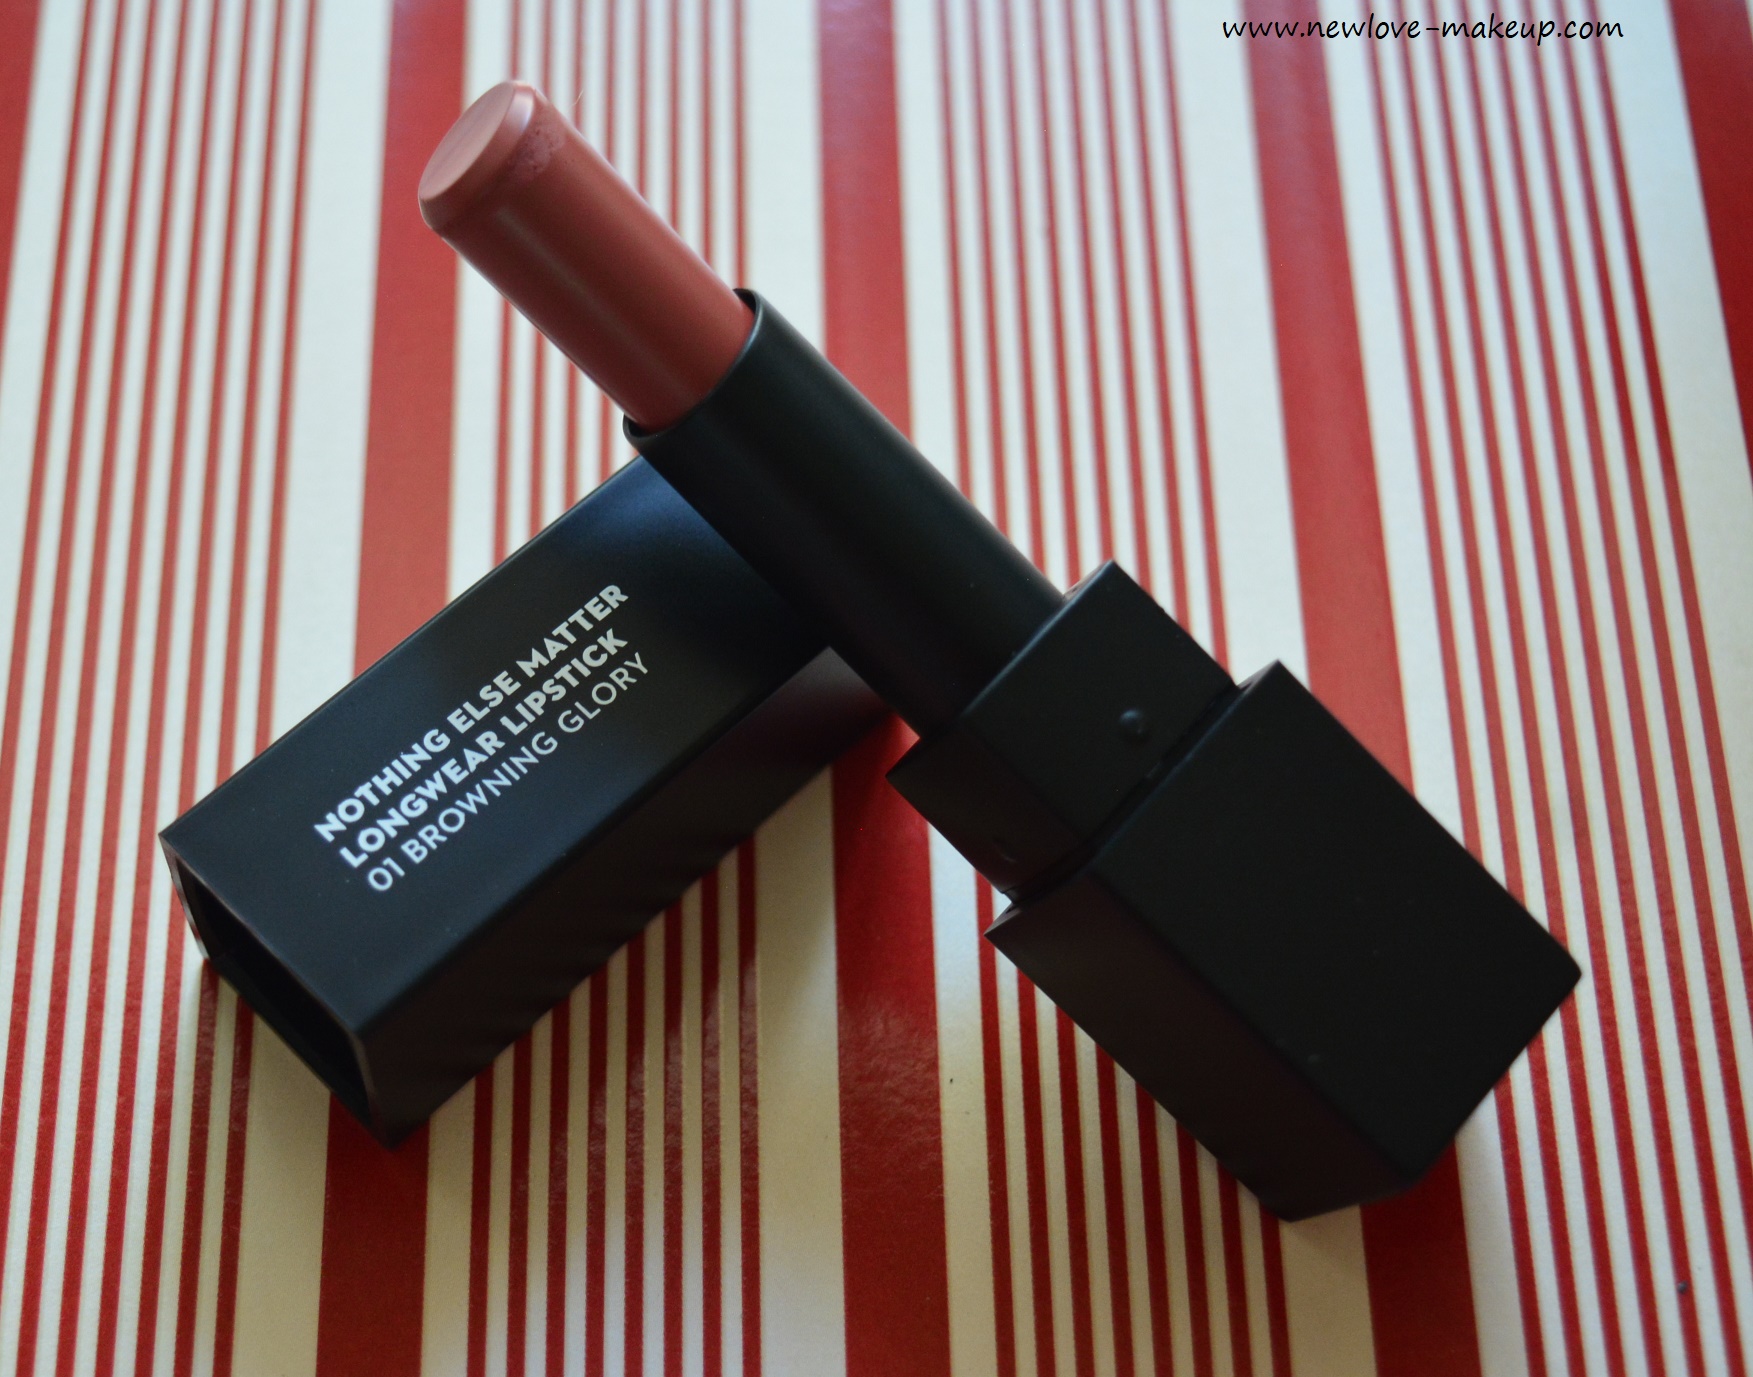 NEW Sugar Cosmetics Nothing Else Matter Lipsticks Review, Swatches